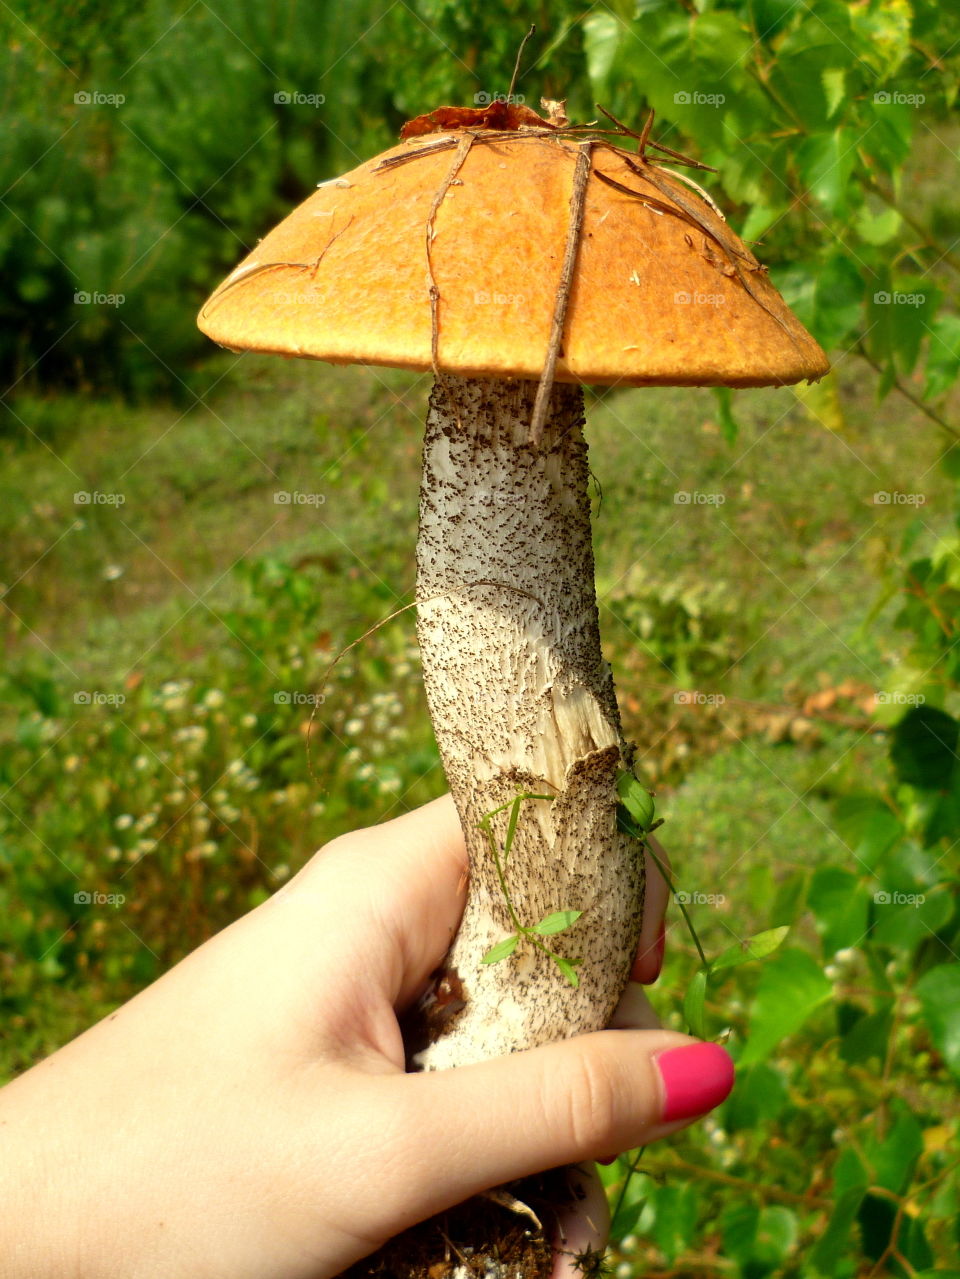 Really delicious red mushroom